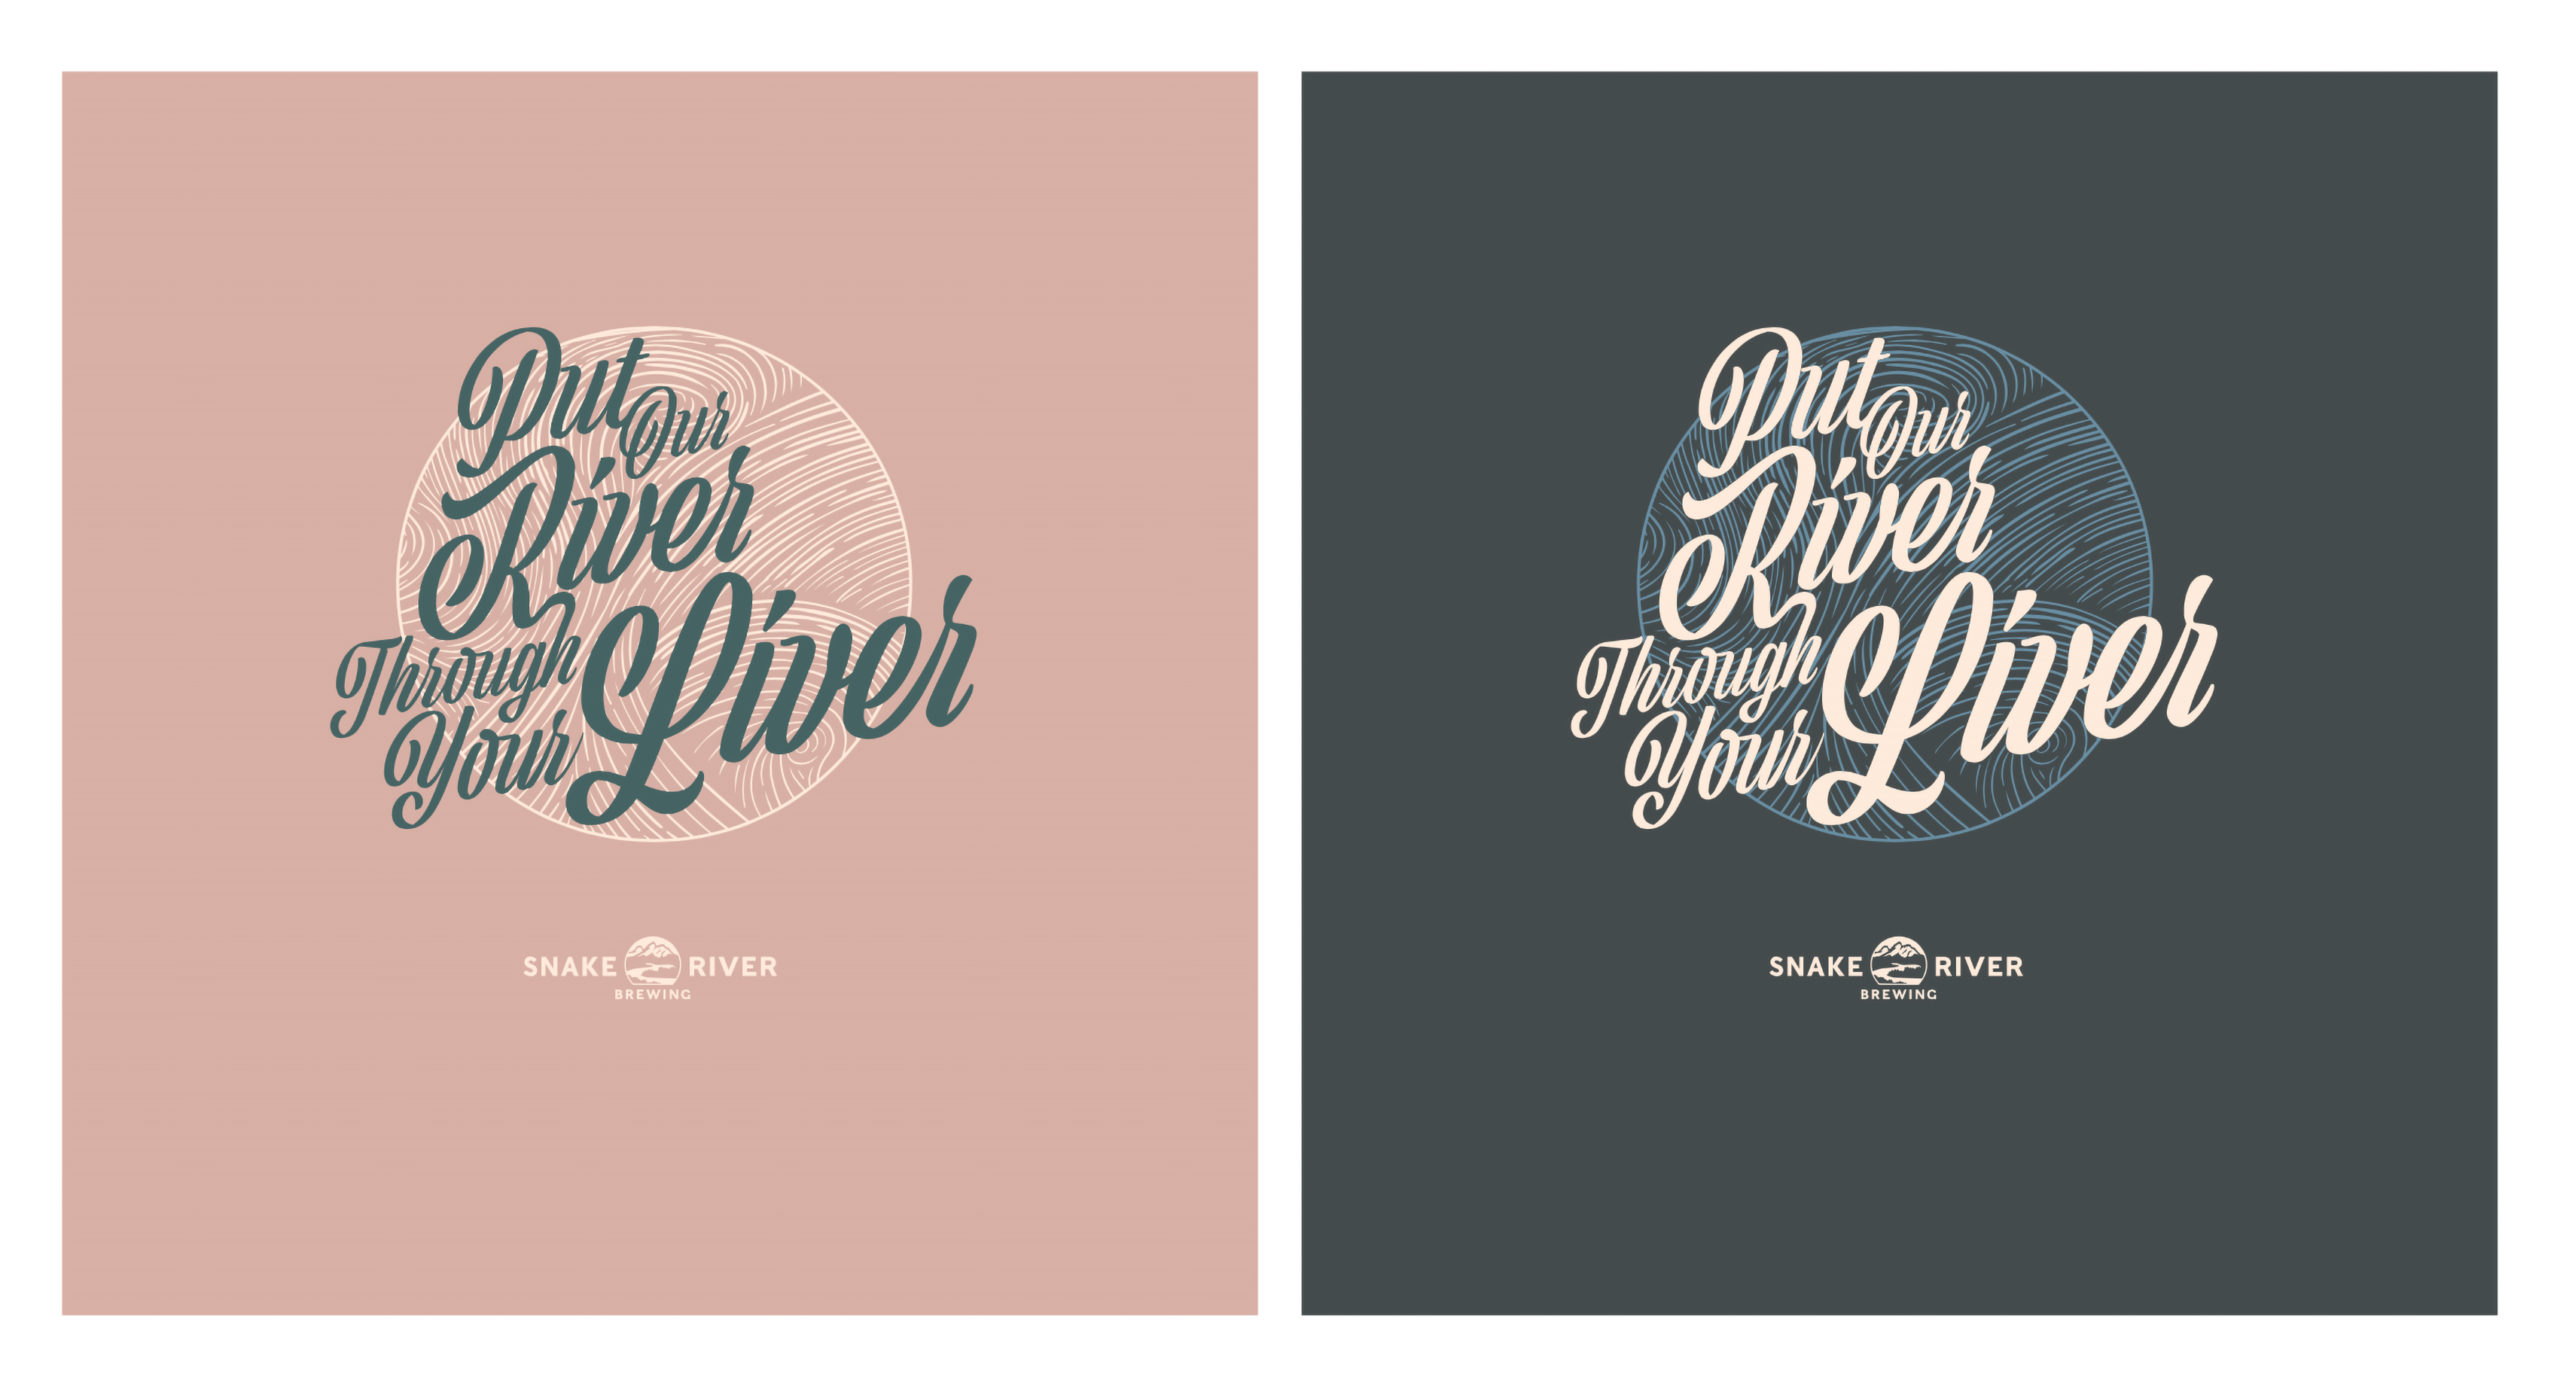 New-Thought-Snake-River-Brewery-Merchandise-Tagline-Shirts-fullscreen